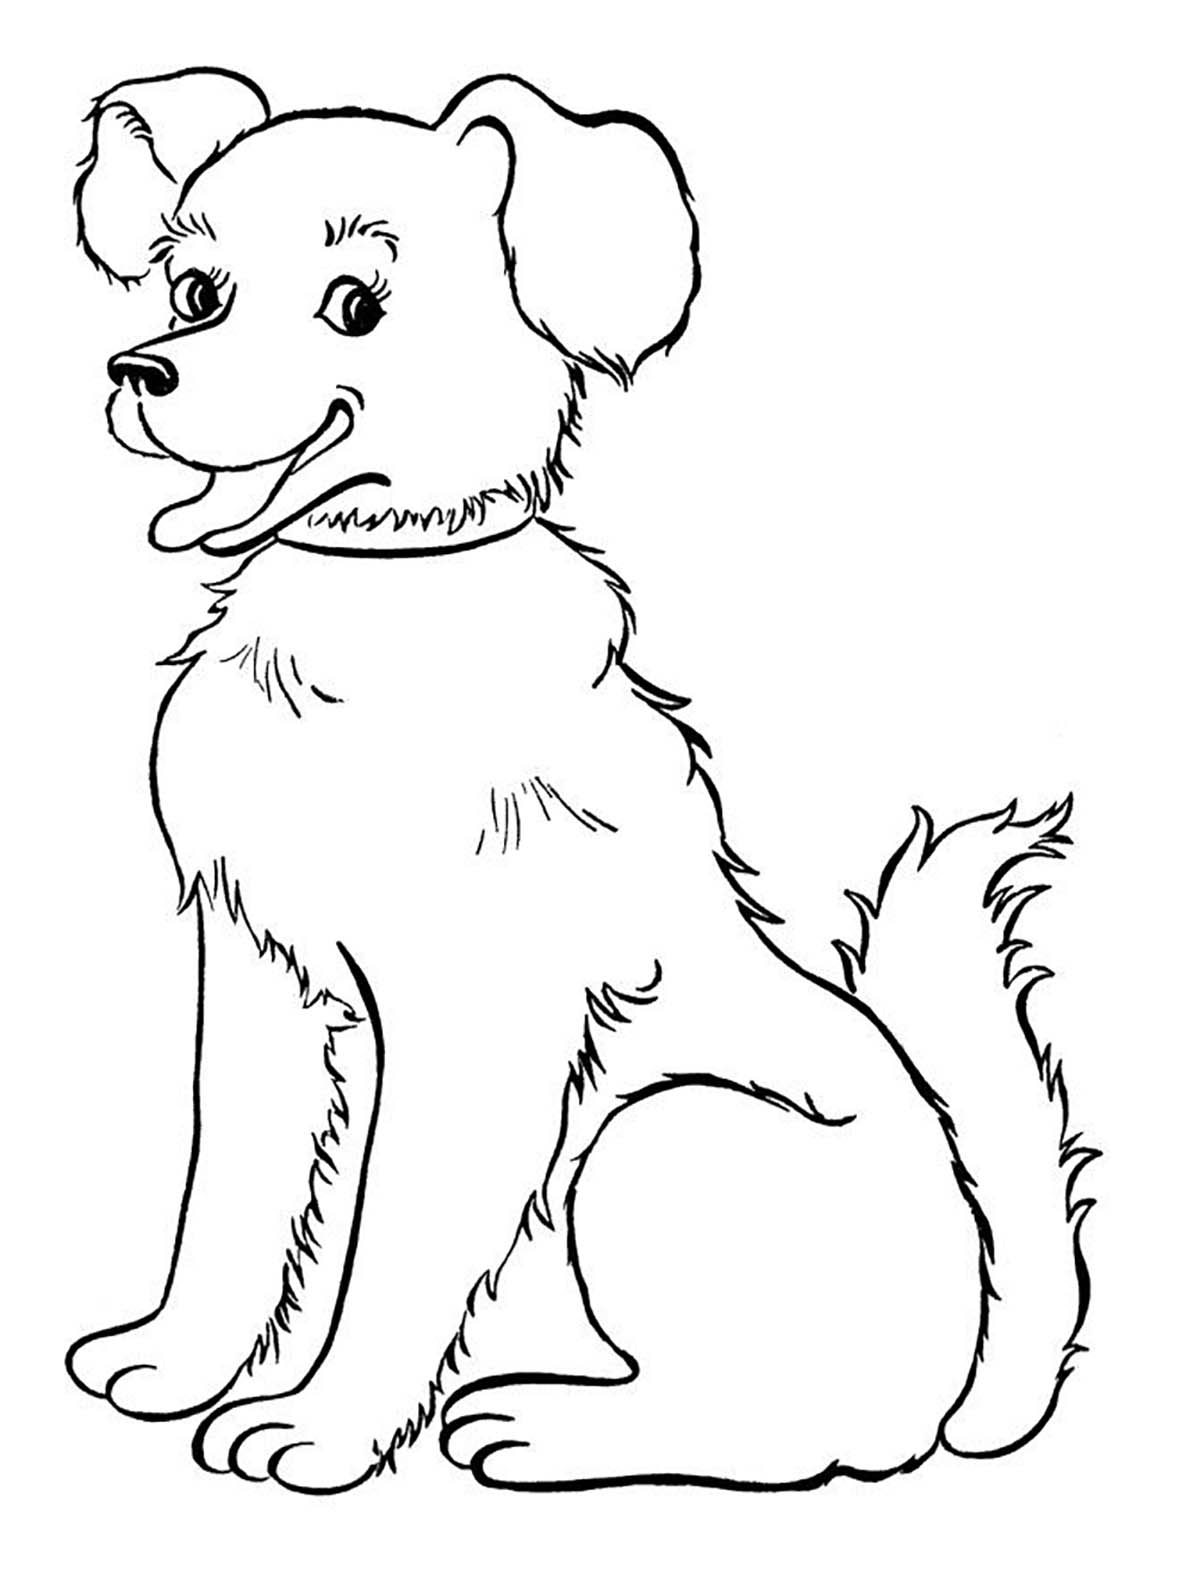 Dog for children : smiling dog - Dogs Kids Coloring Pages